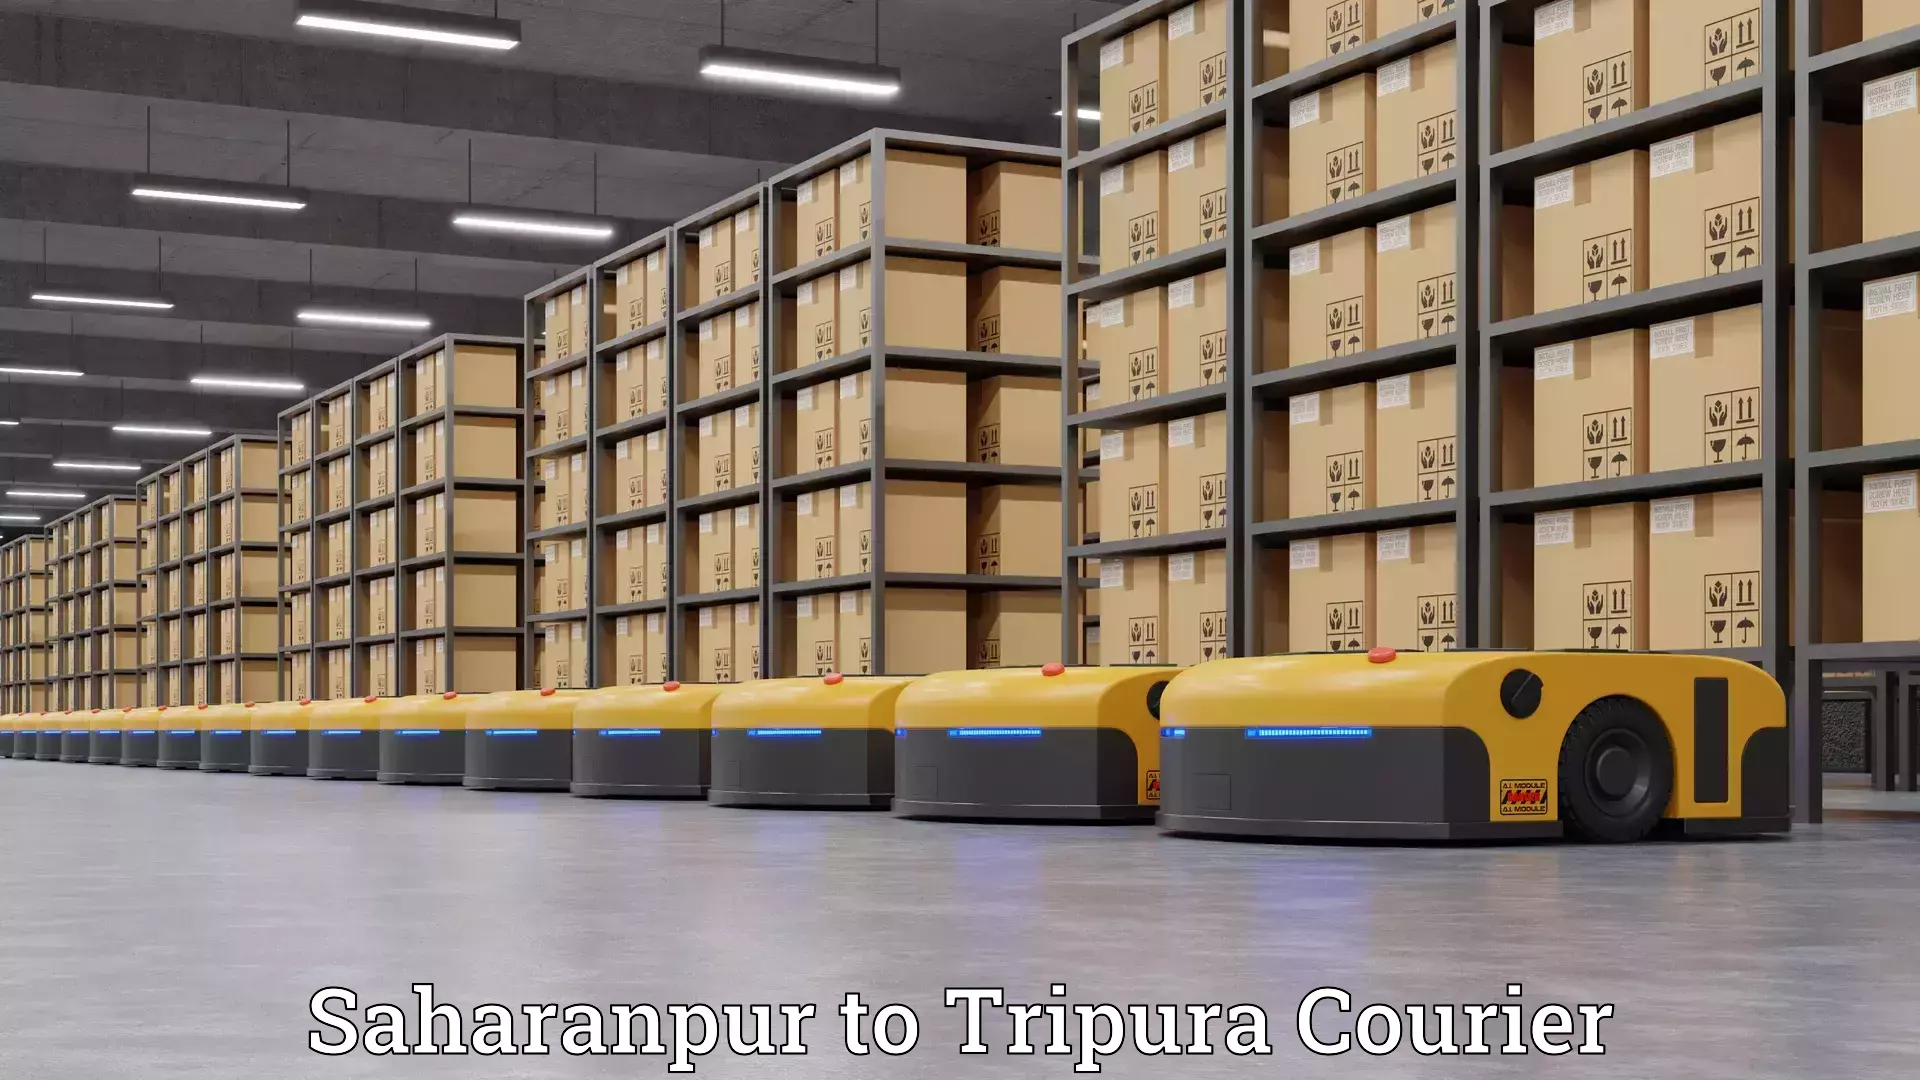 Furniture delivery service Saharanpur to Tripura